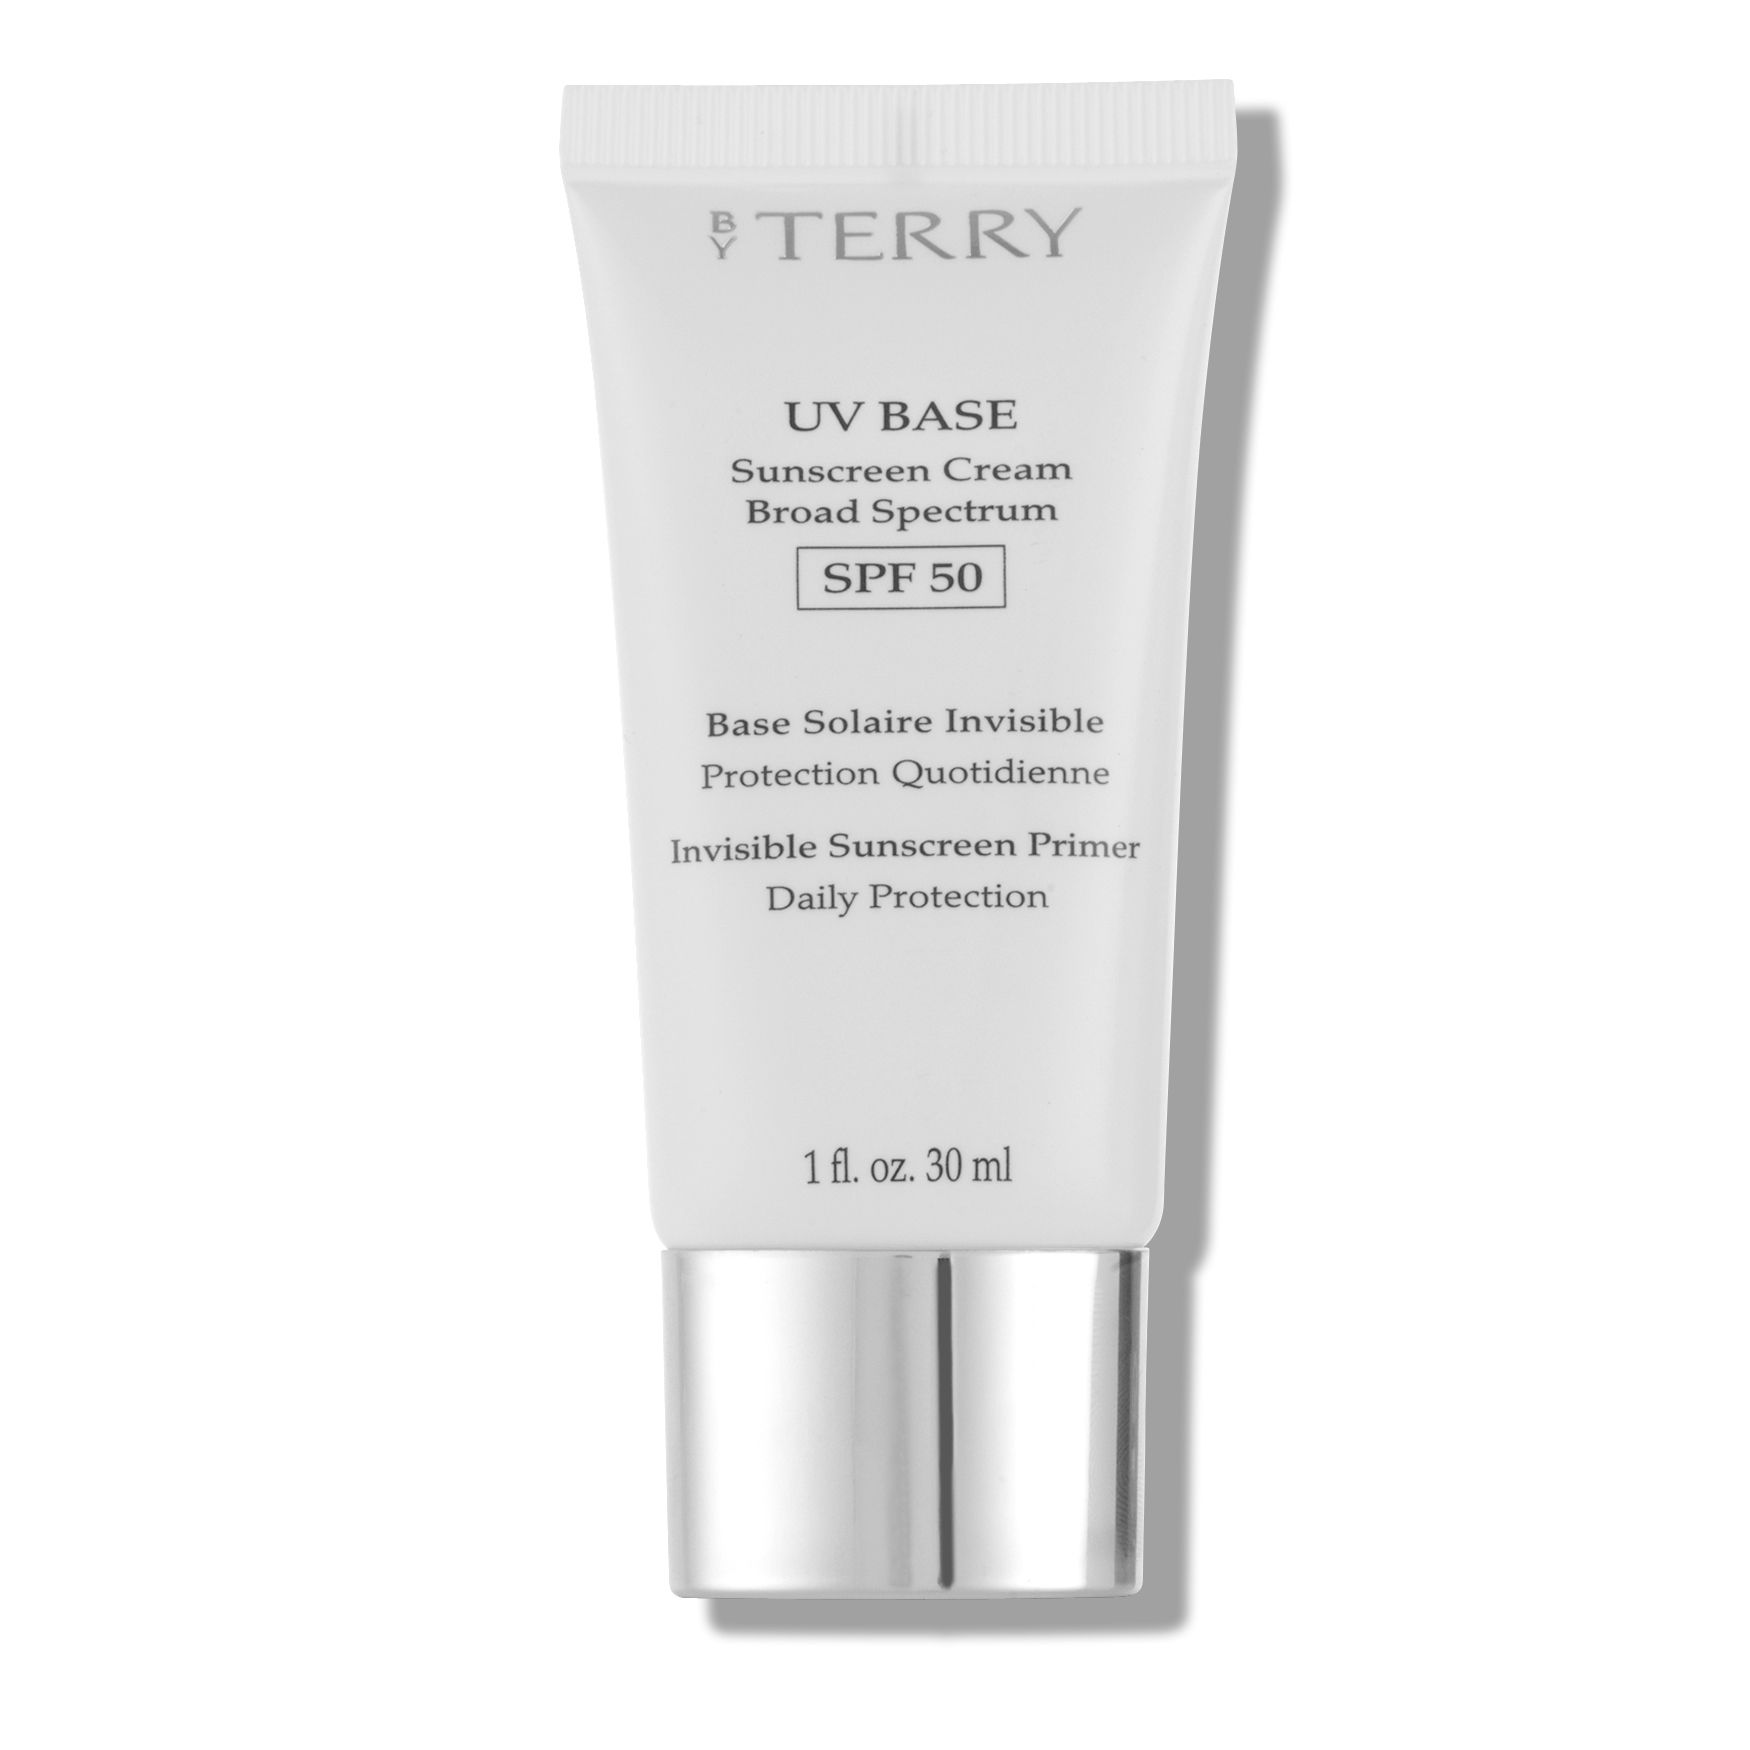 By Terry UV Base Sunscreen Cream Broad Spectrum SPF 50 | Space NK (US)